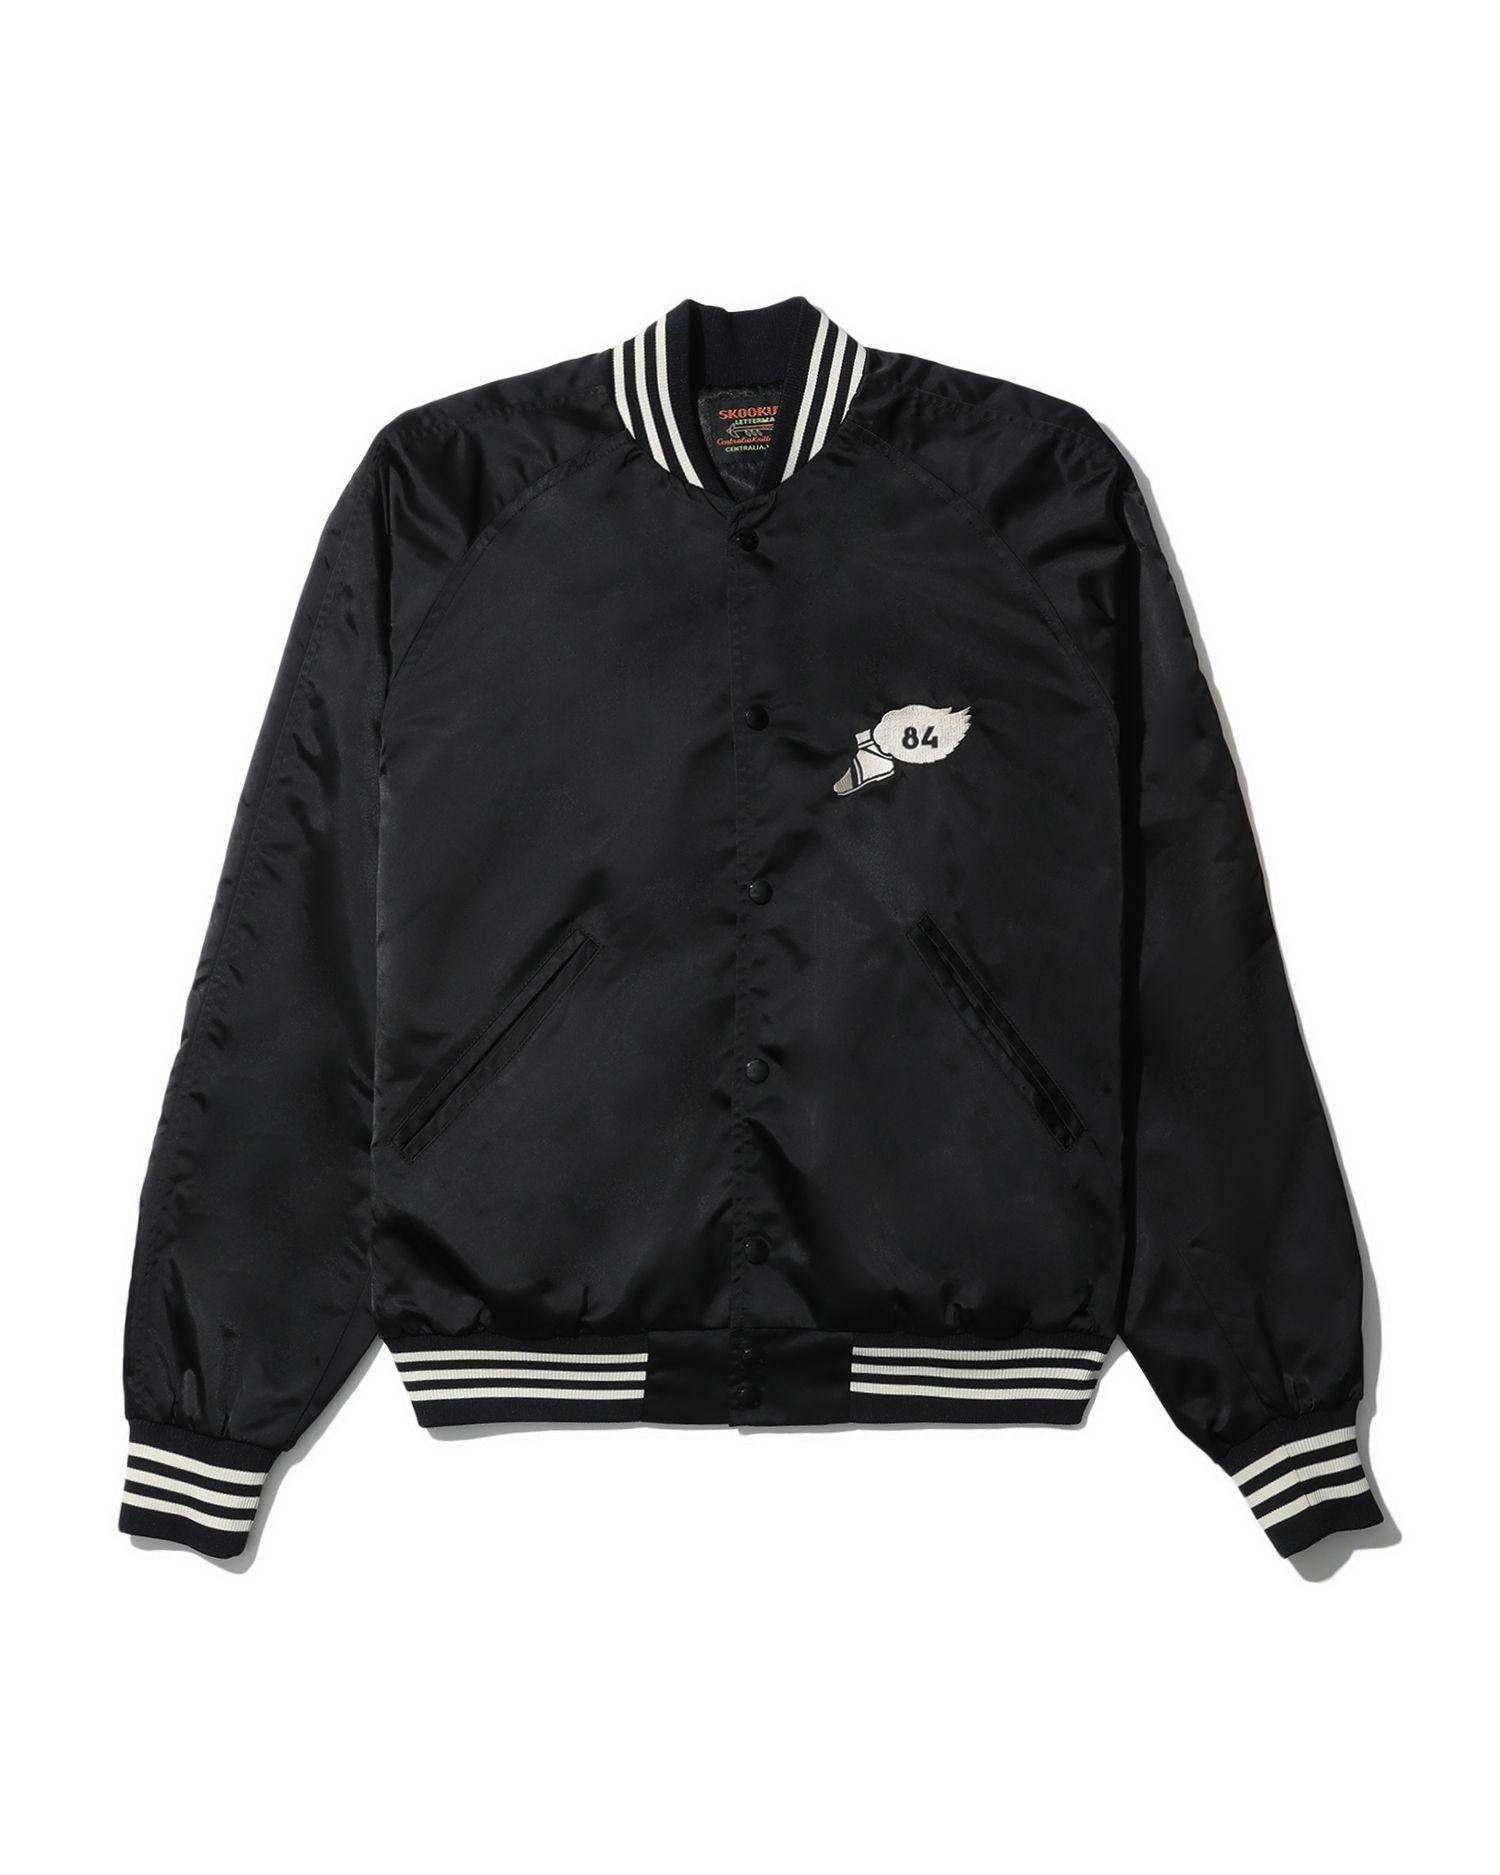 Embroidered baseball jacket by BEAUTY&YOUTH MONKEY TIME